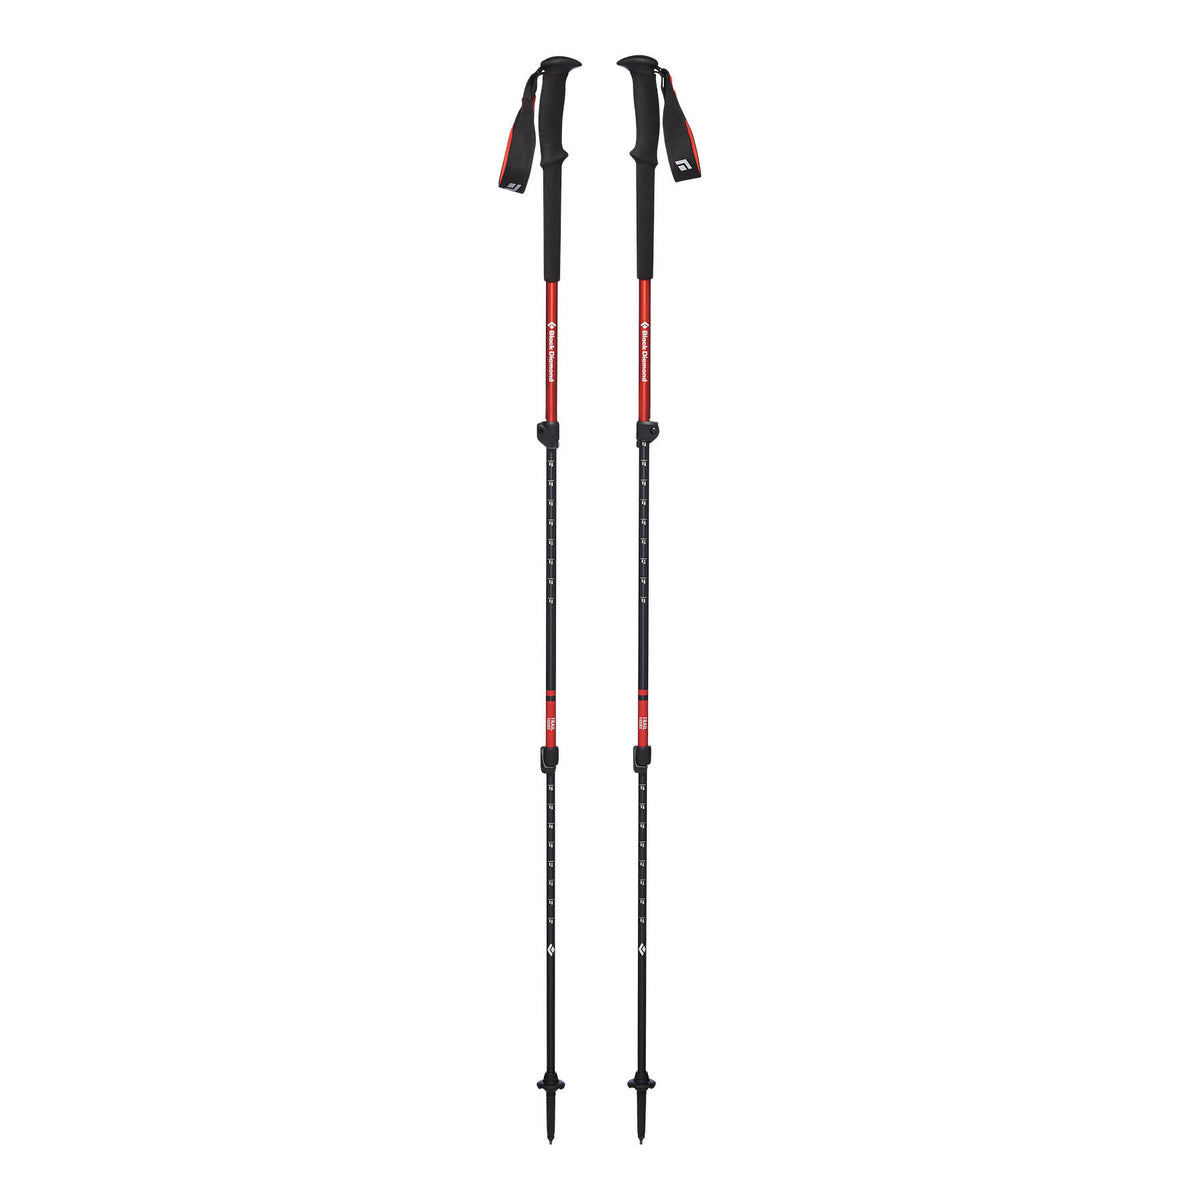 Pair of Black Diamond Trail Trekking Poles, shown fully extended and stood upright